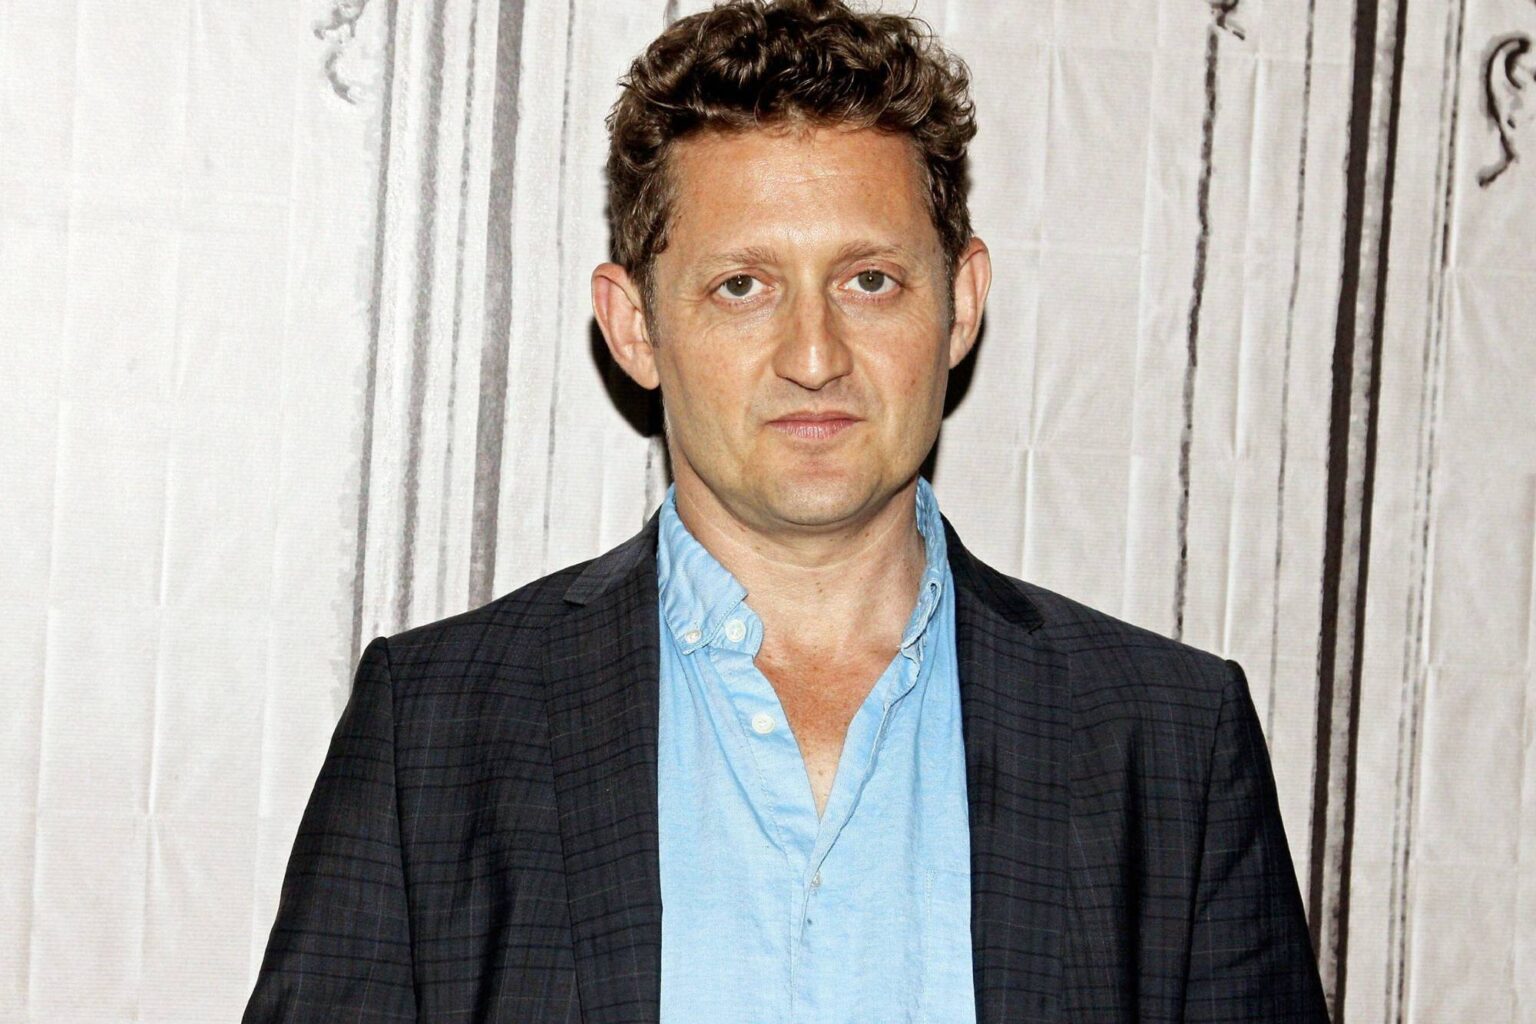 Alex Winter recently opened up about his childhood abuse. Find out how the 'Bill & Ted' actor made peace with his traumatic past.